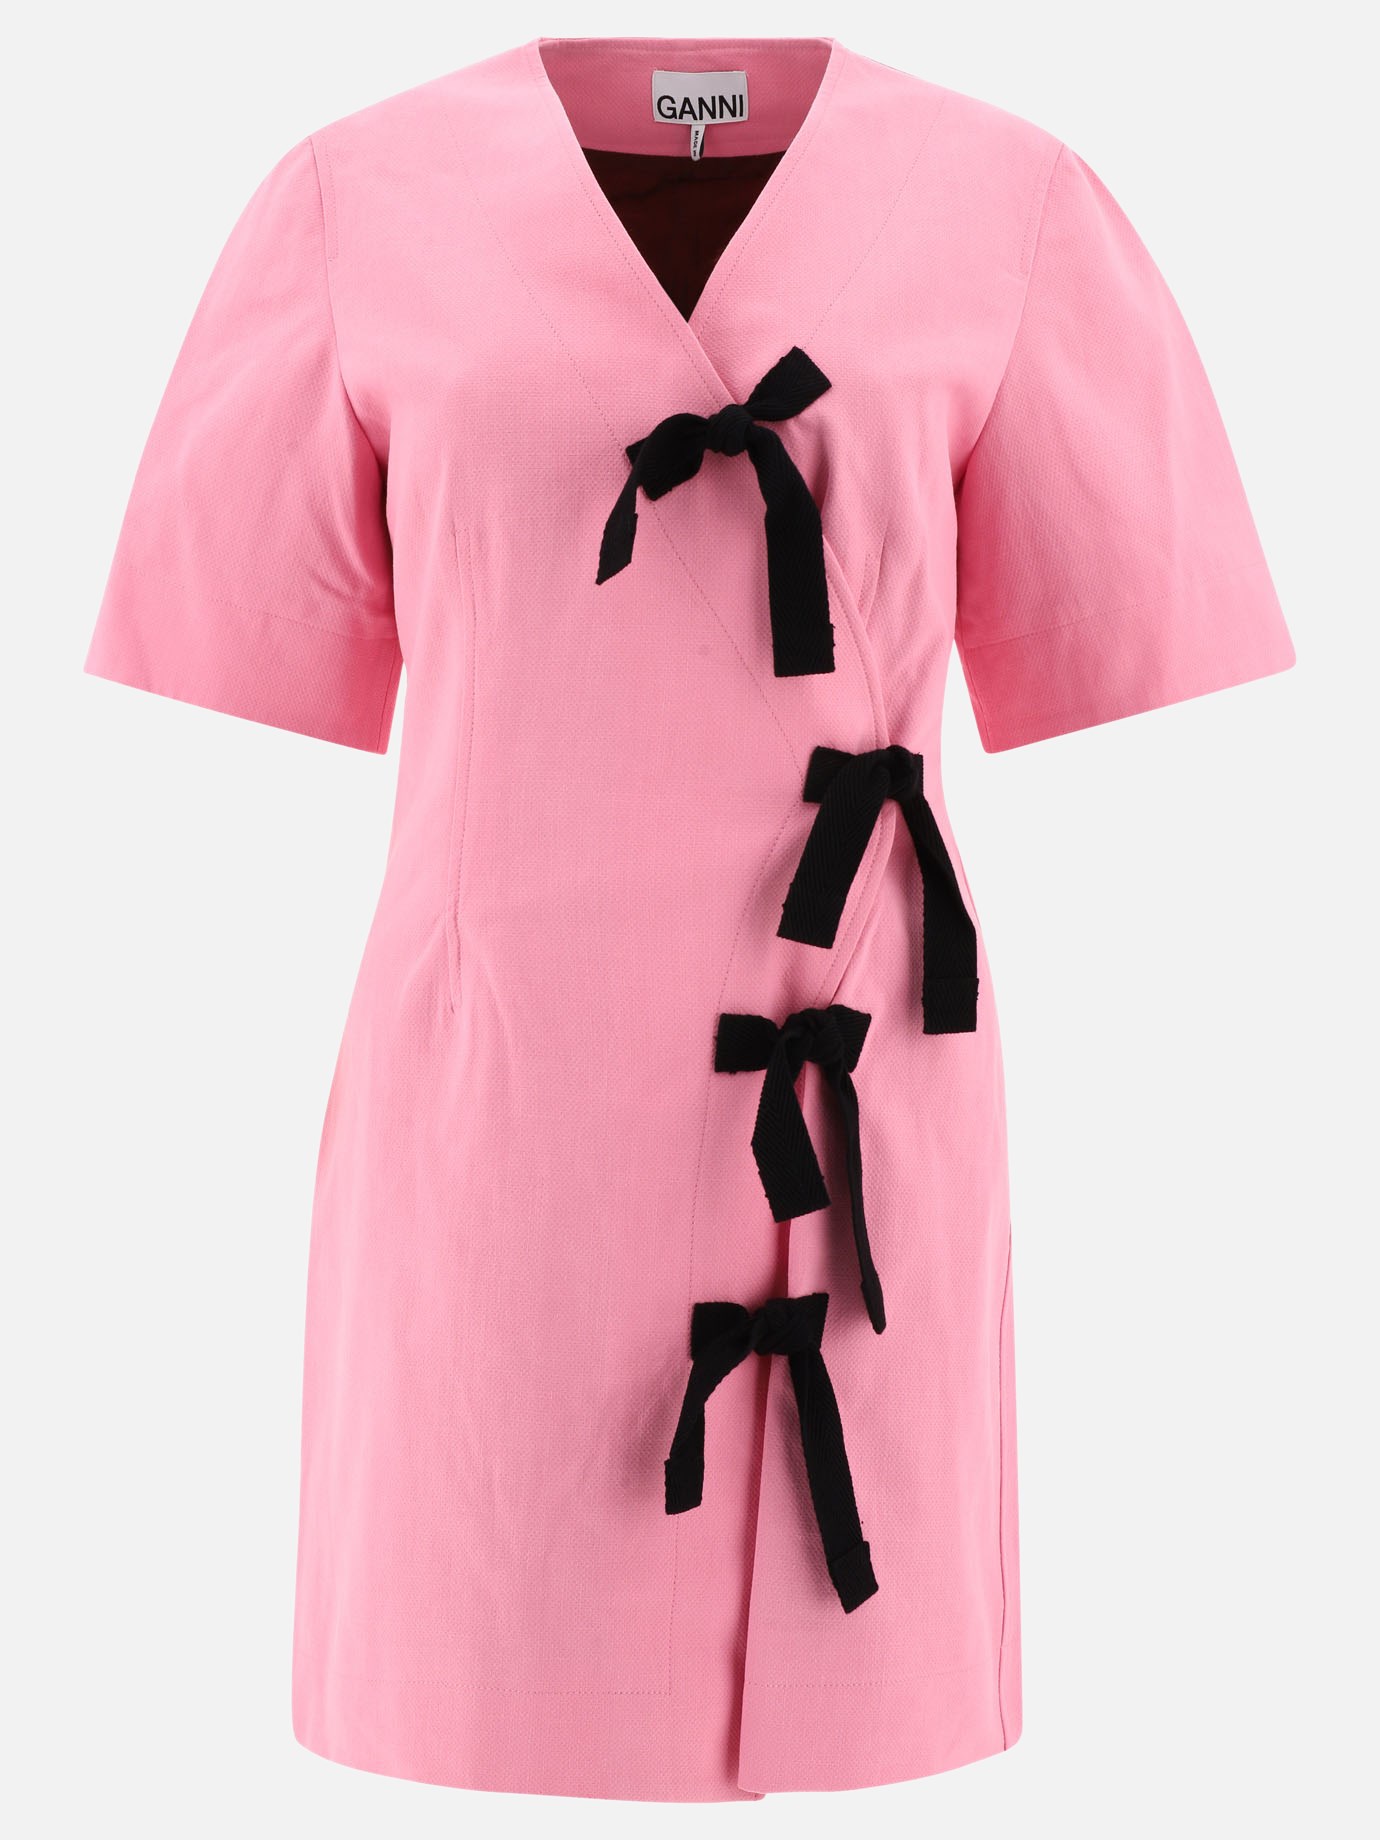 Asymmetric dress with ribbons